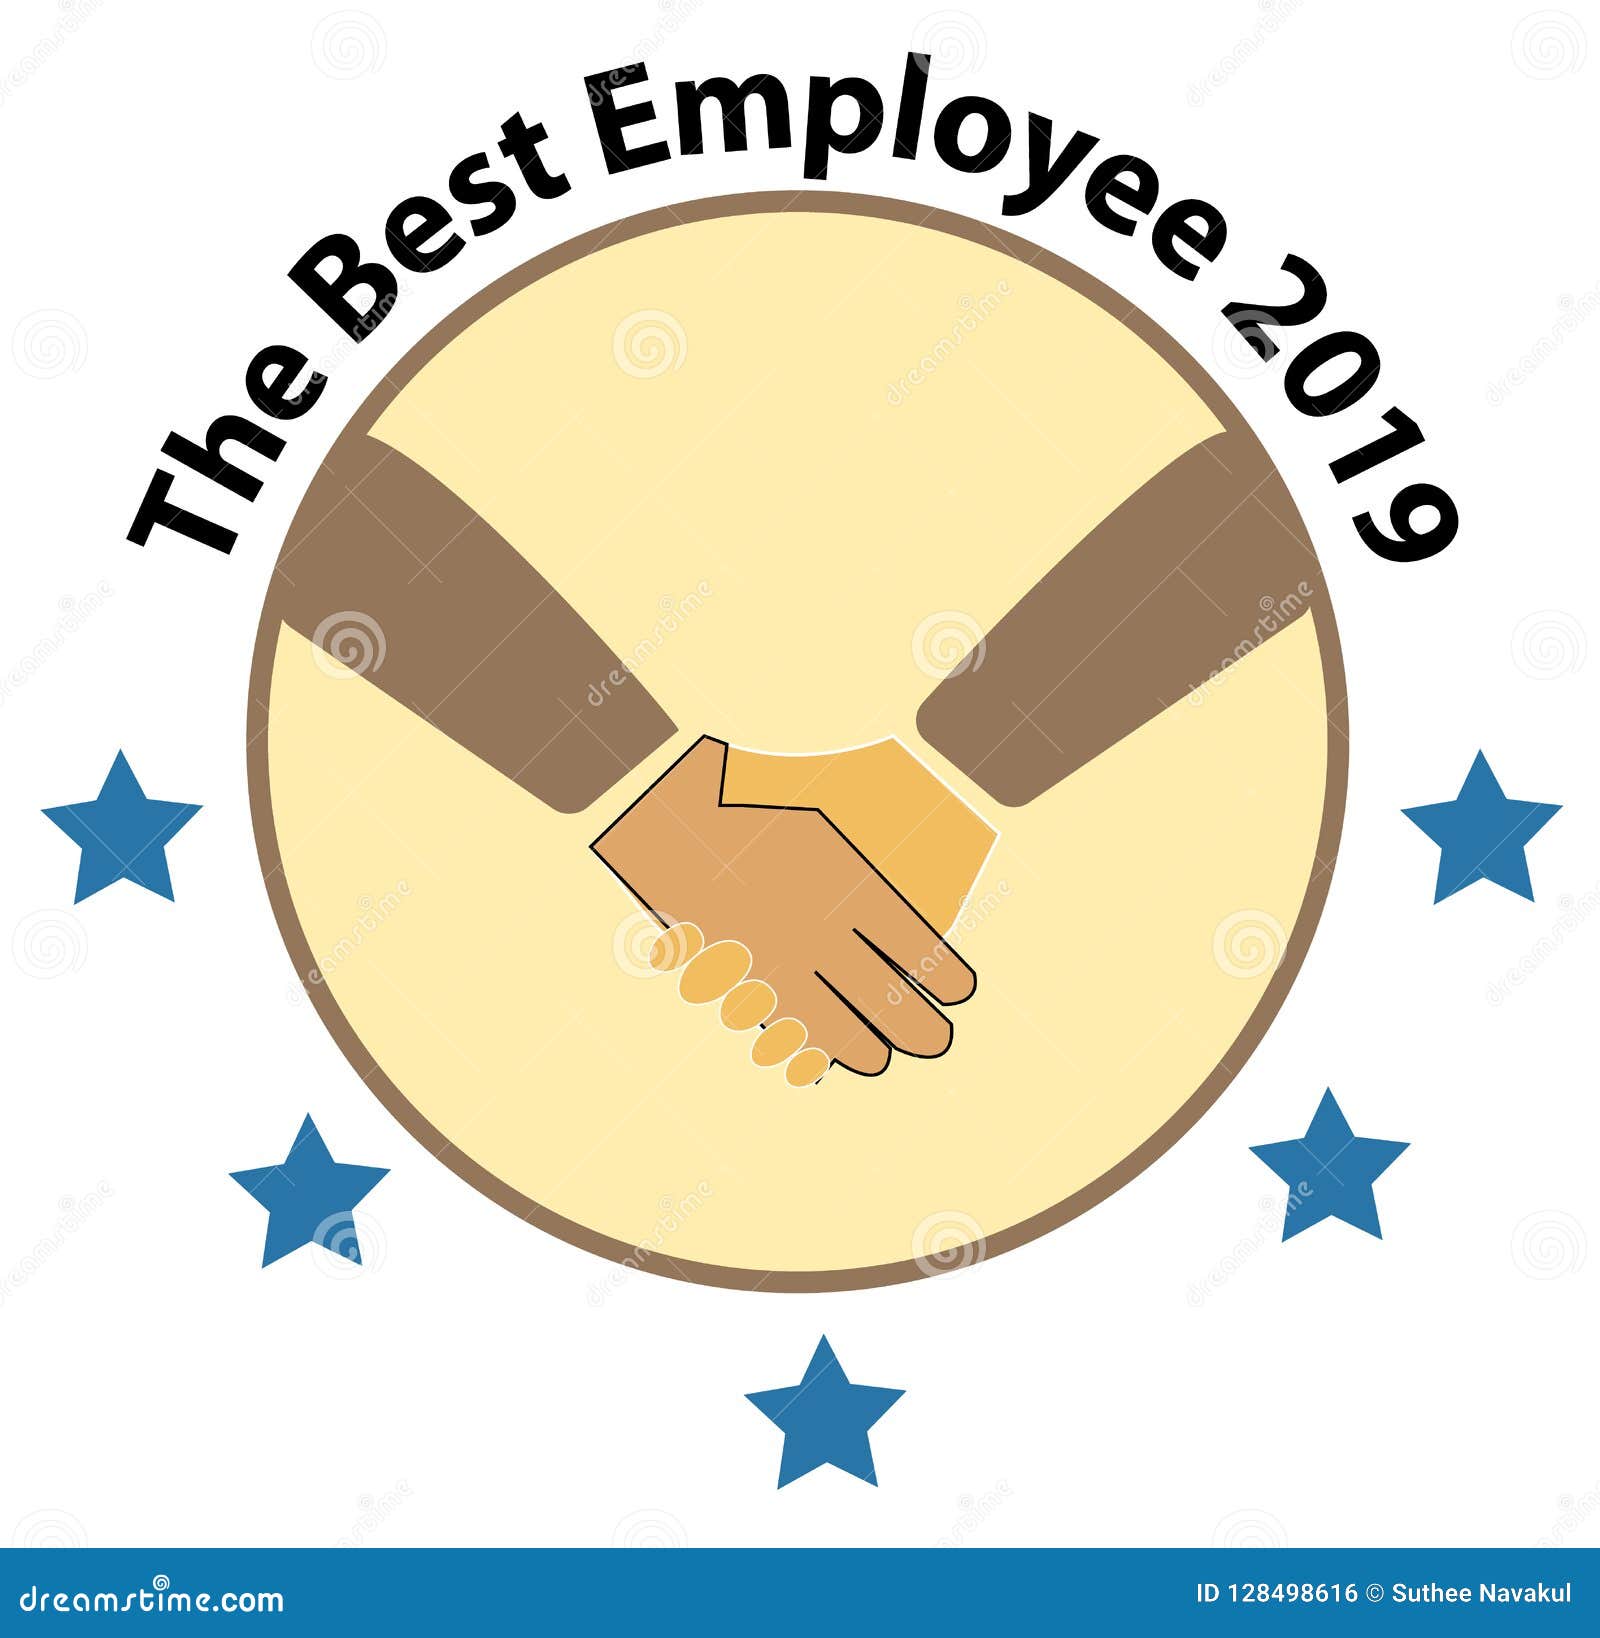 The Best Employee 2019 Logo. the Best Employee Icon on White Background